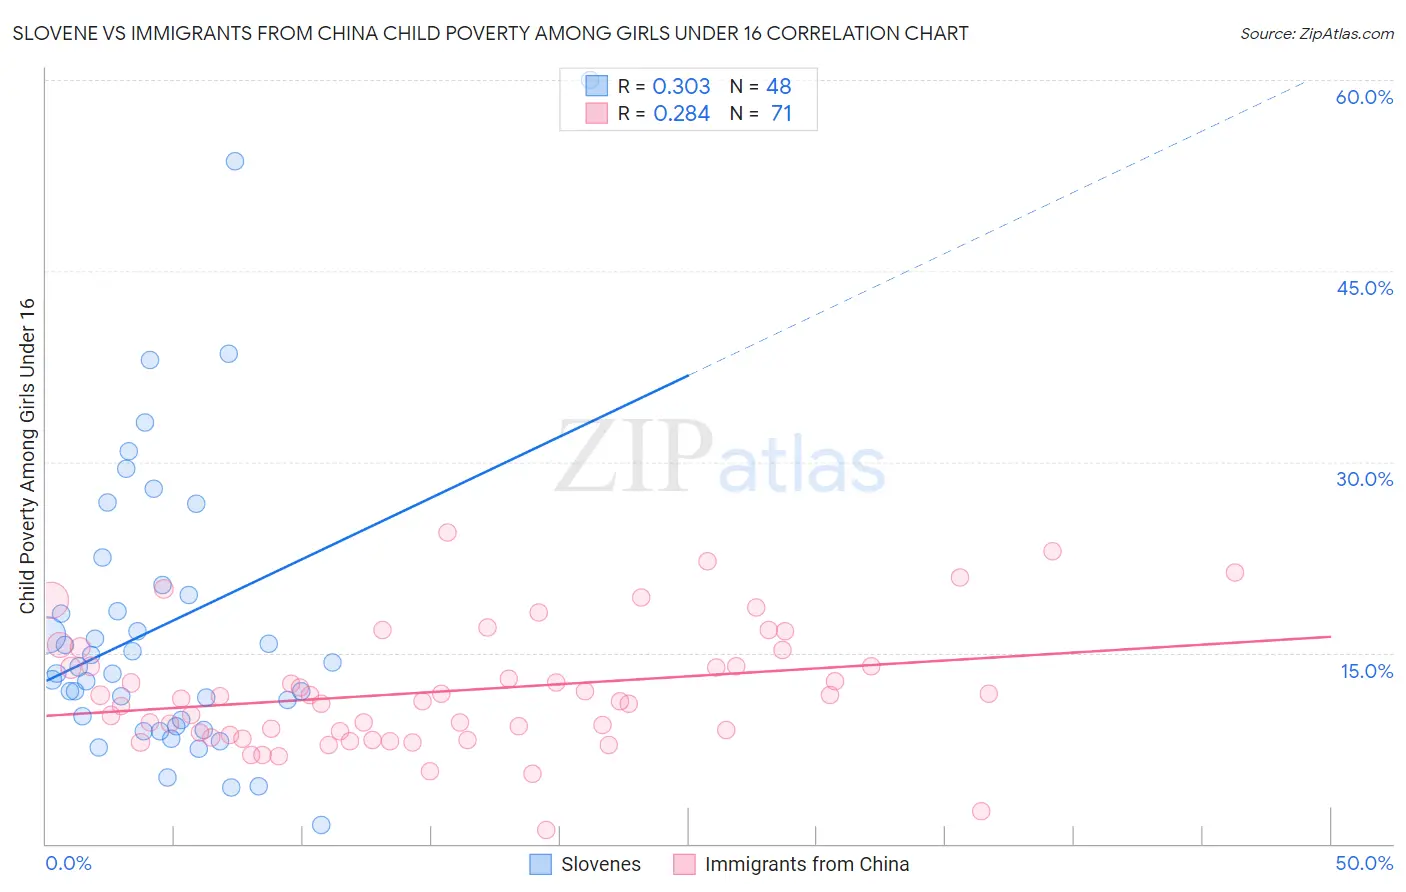 Slovene vs Immigrants from China Child Poverty Among Girls Under 16